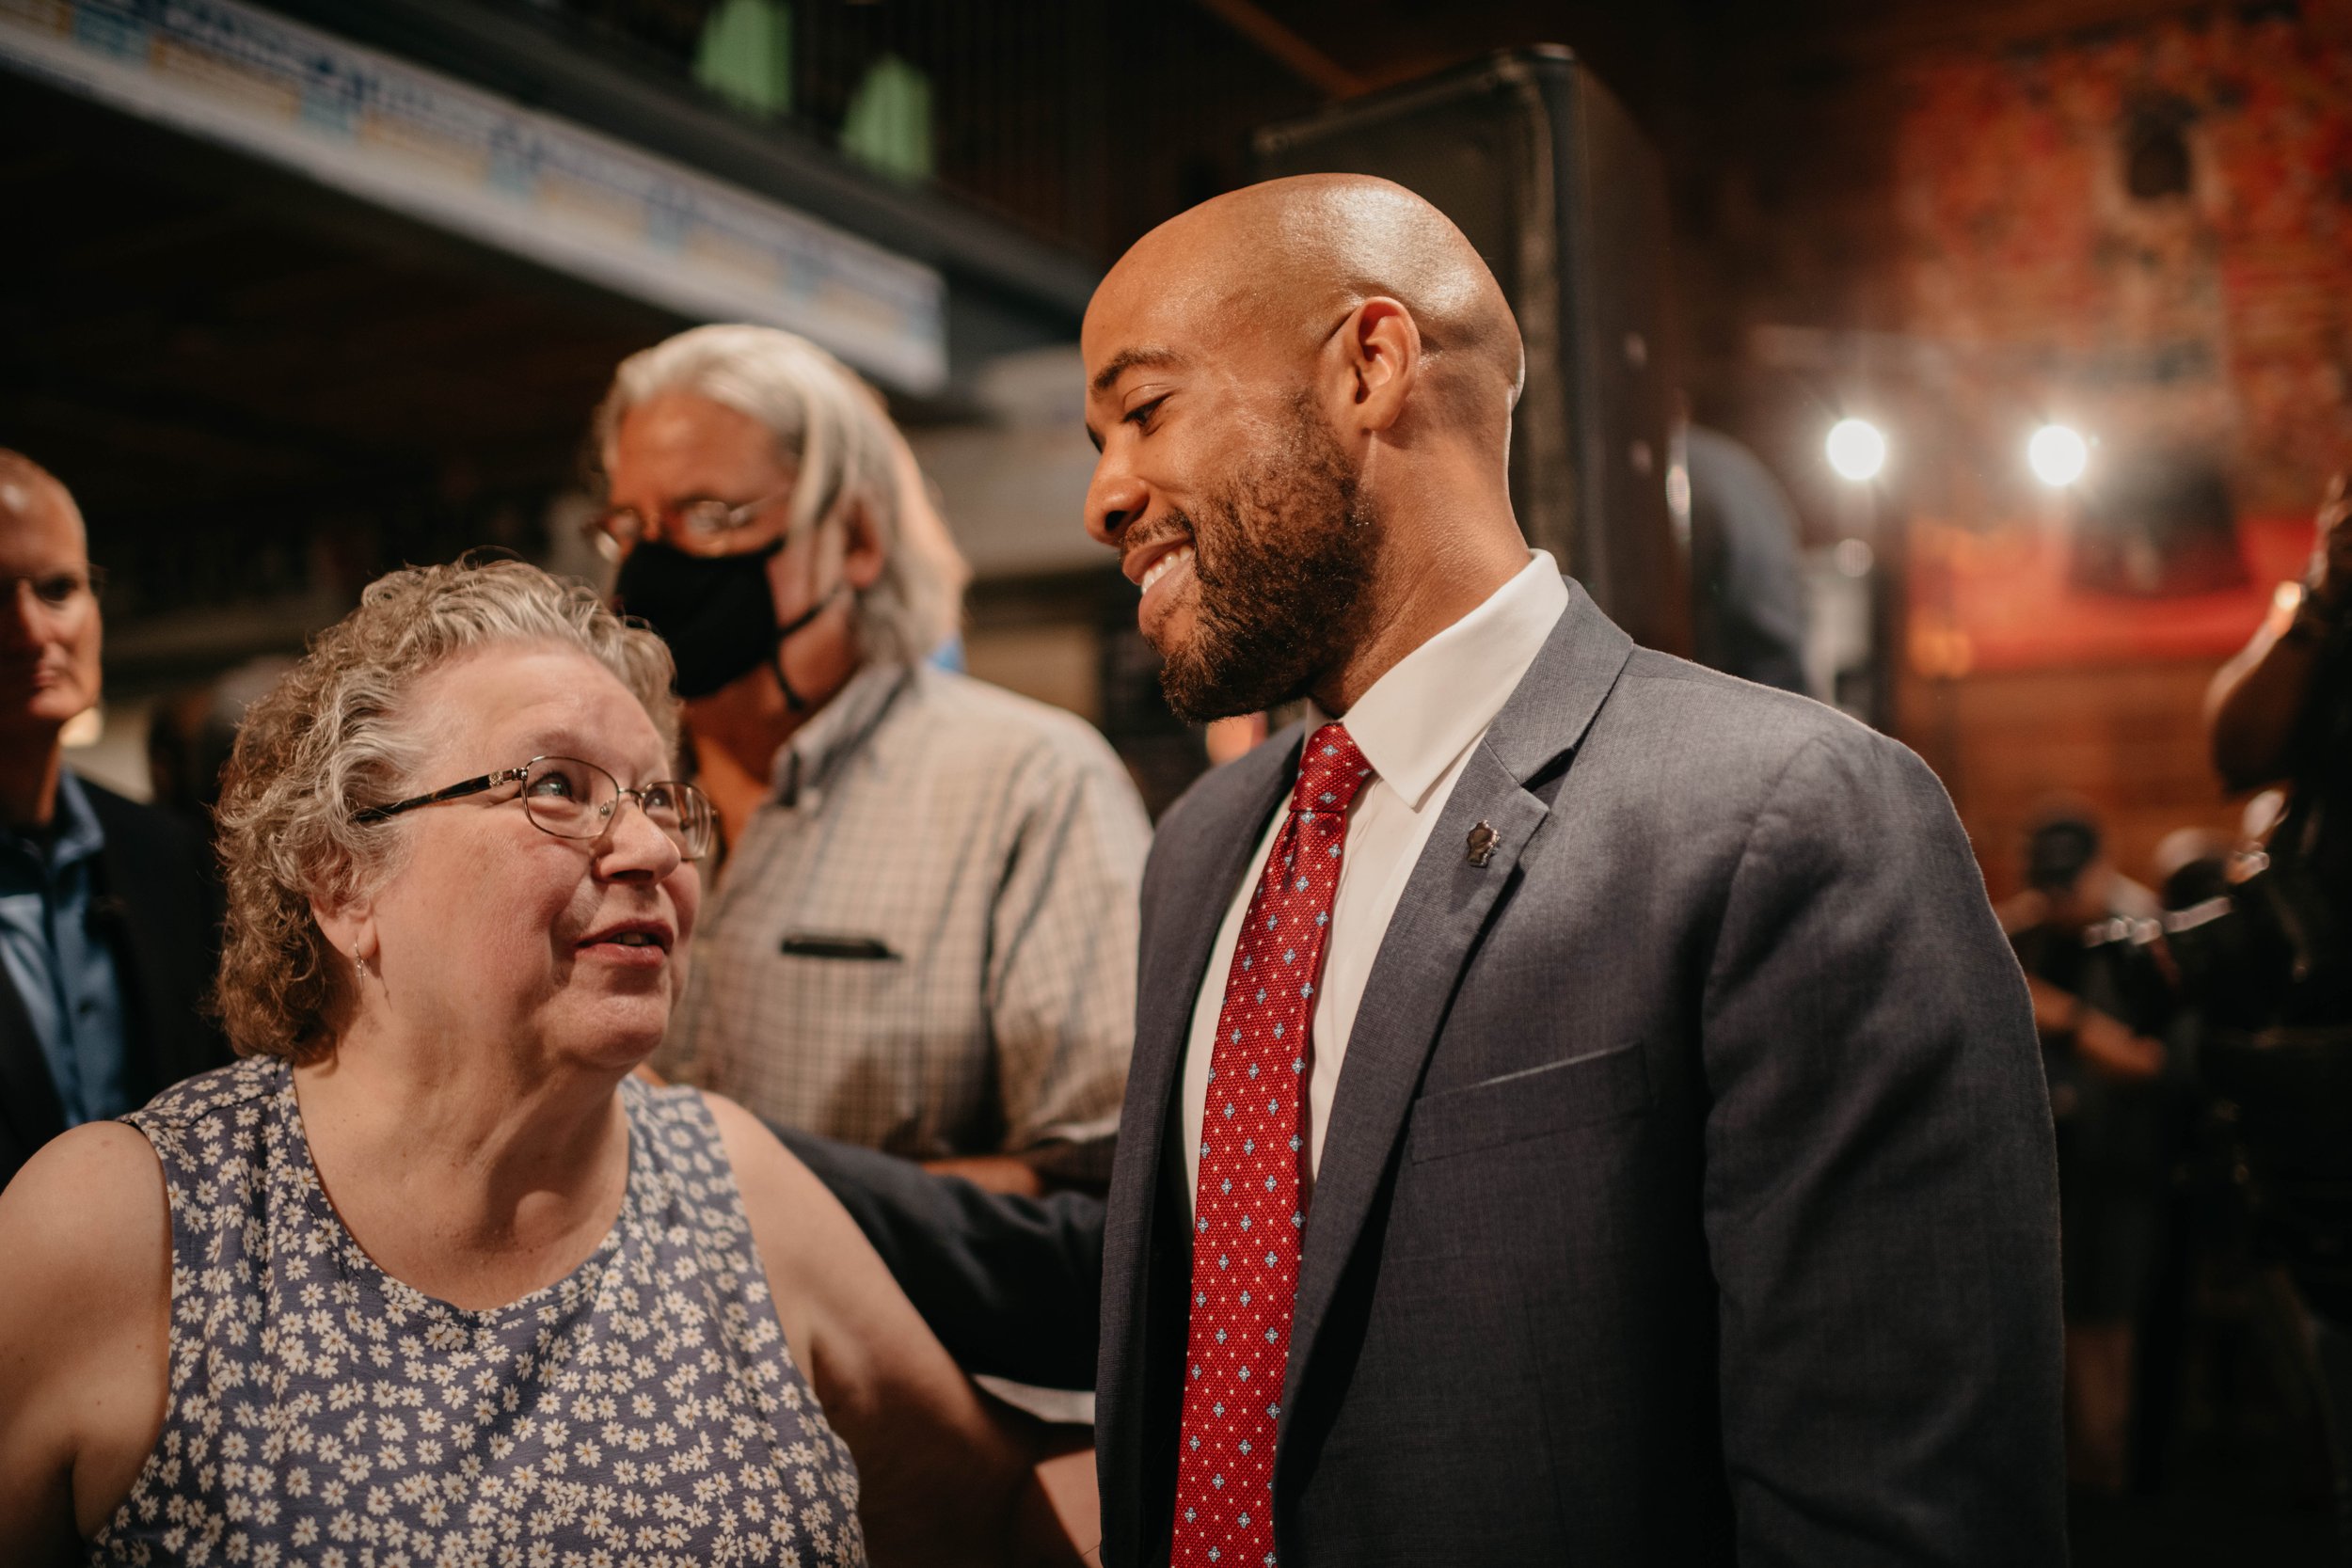 Lt. Governor Mandela Barnes launches his campaign for U.S. Senate in Milwaukee, Wisconsin, 2021